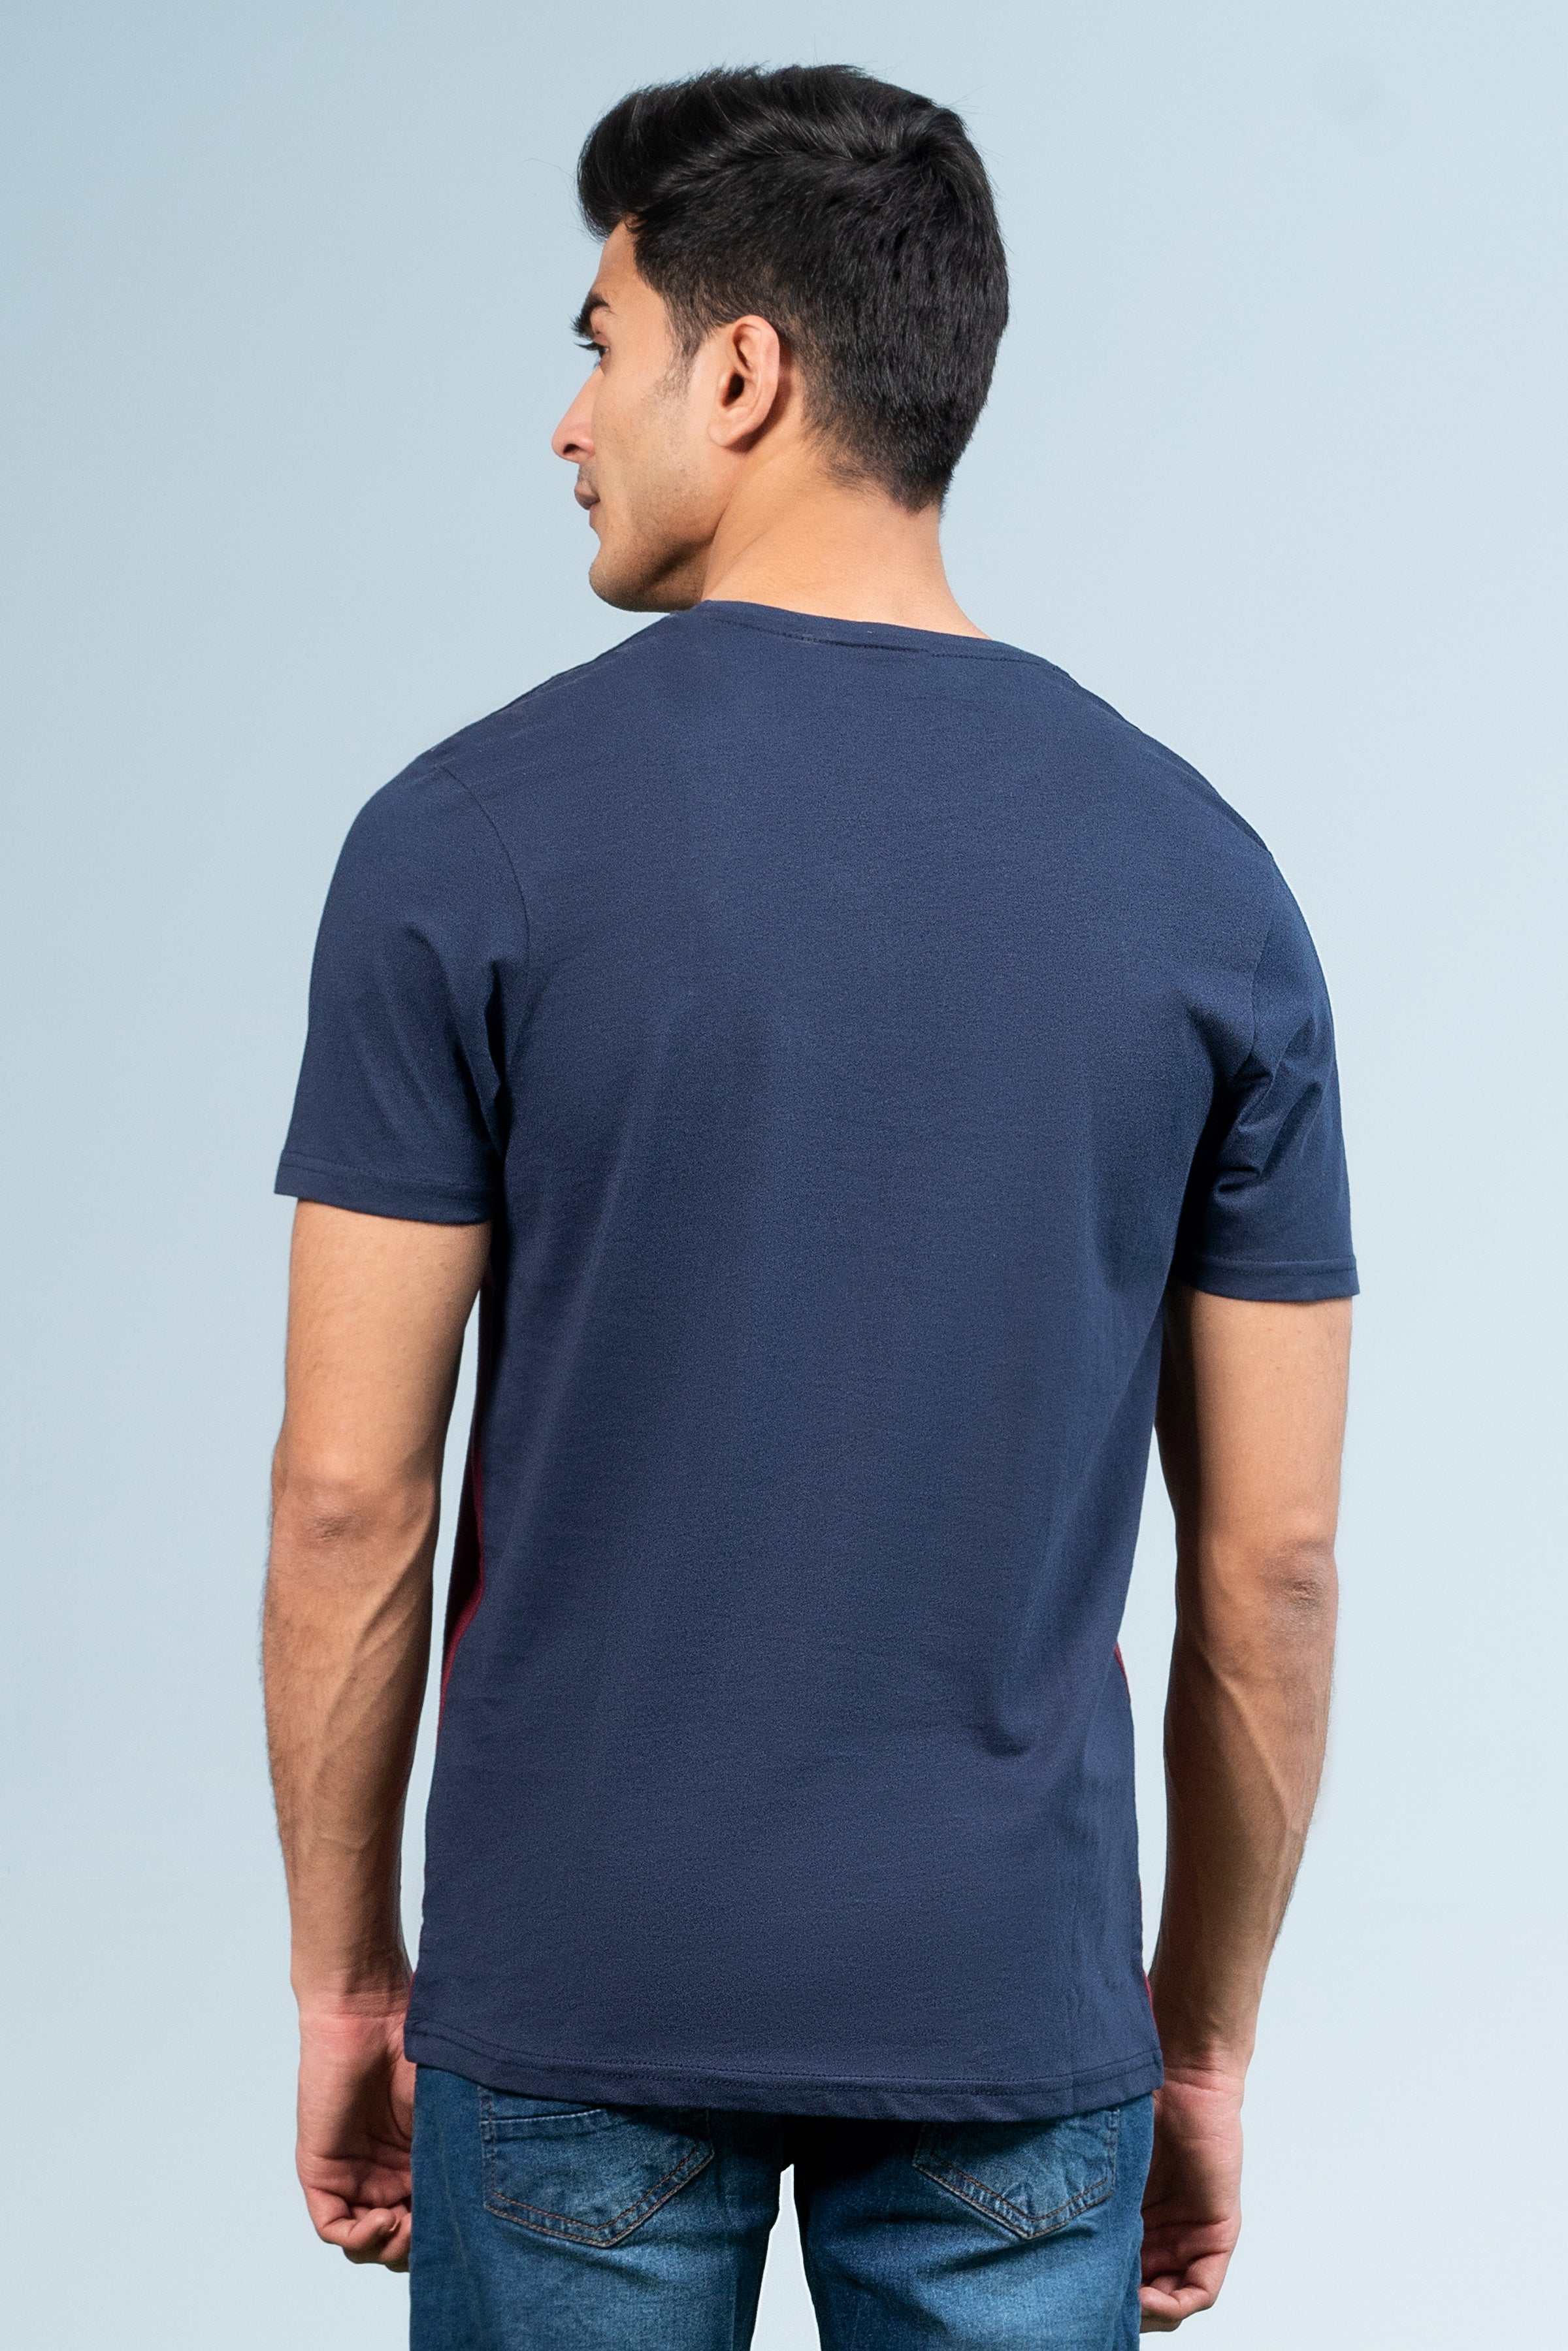 CUT & SEW PANNEL T-SHIRT NAVY at Charcoal Clothing